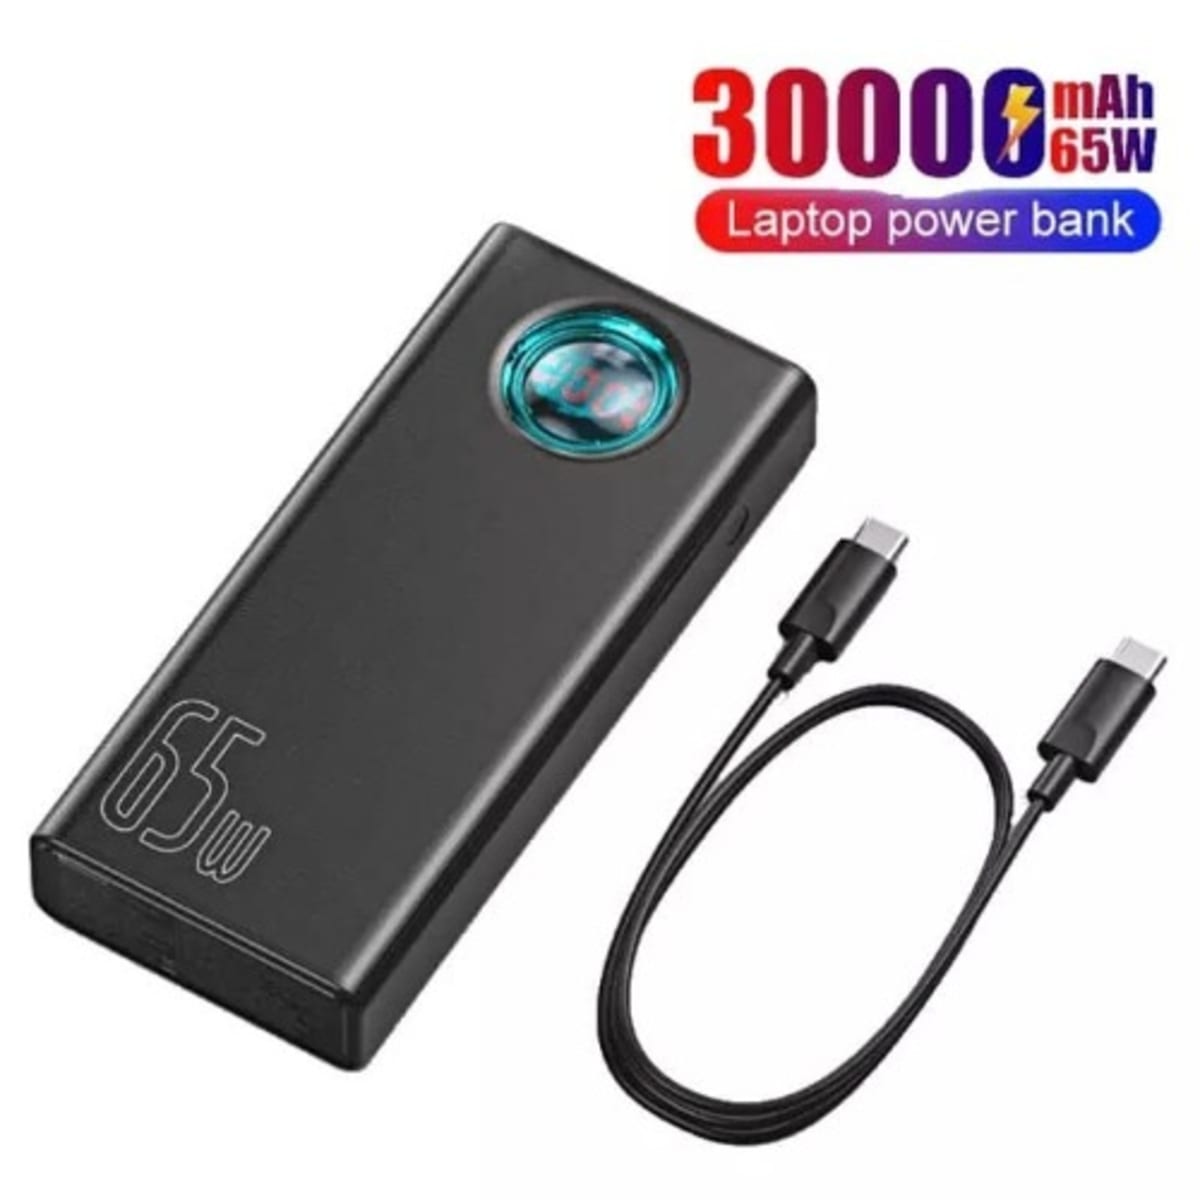 Baseus 30000mAh Power Bank 65W Fast Charging Portable Laptop Charger, PD  3.0 7-Port Battery Bank for MacBook, iPad, HP, Notebook, Samsung, iPhone